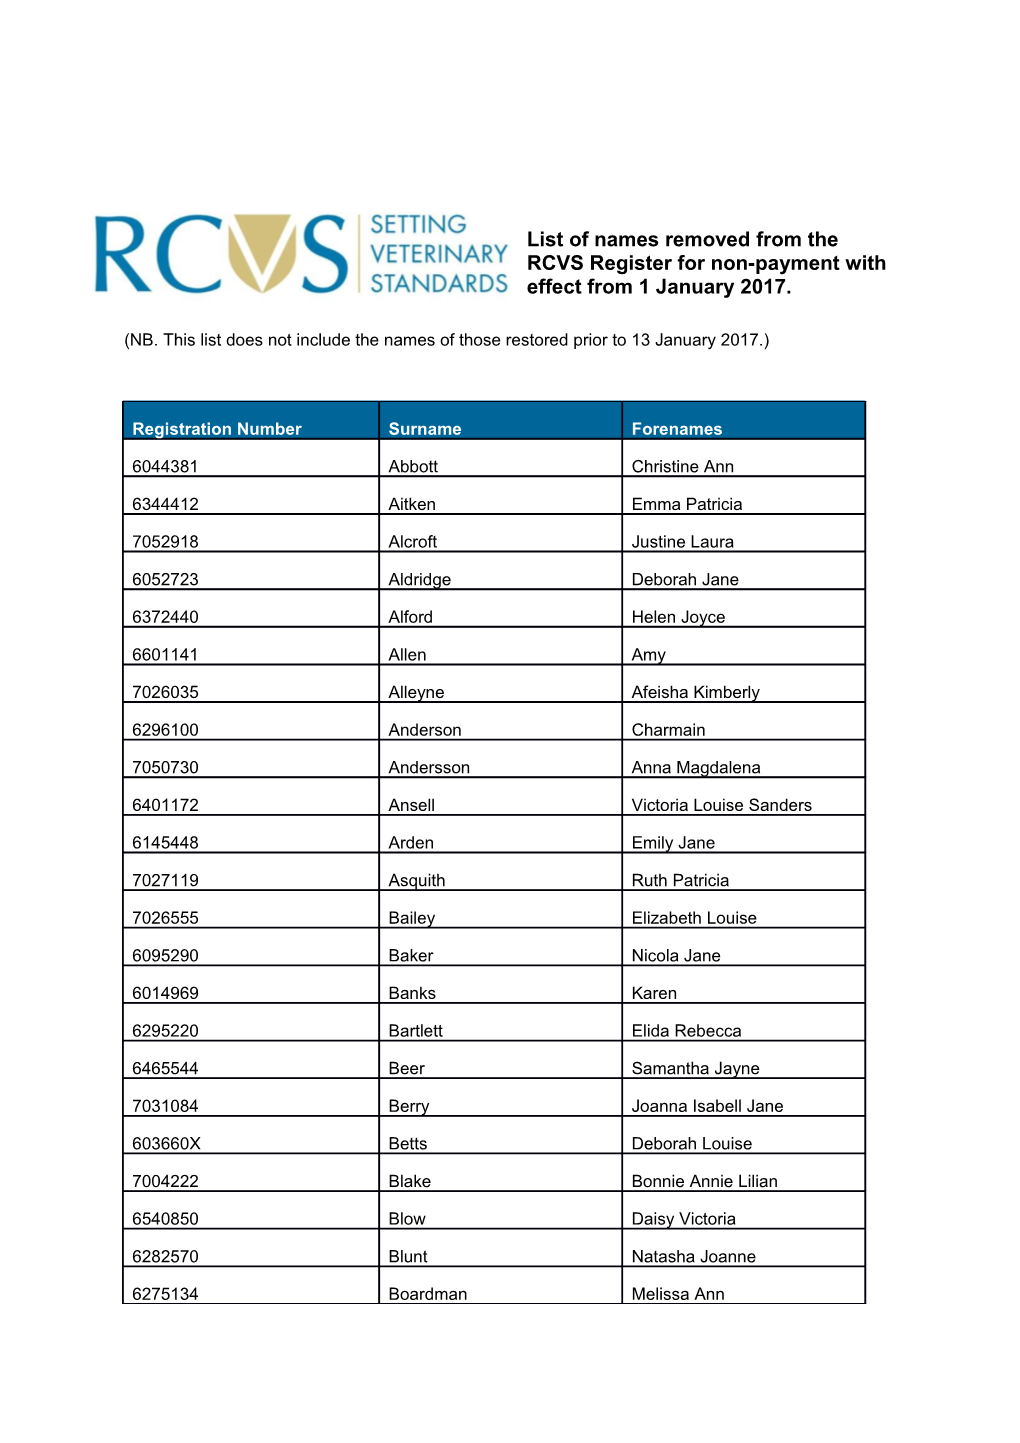 List of Names Removed from the RCVS Register for Non-Payment with Effect from 1 January 2017